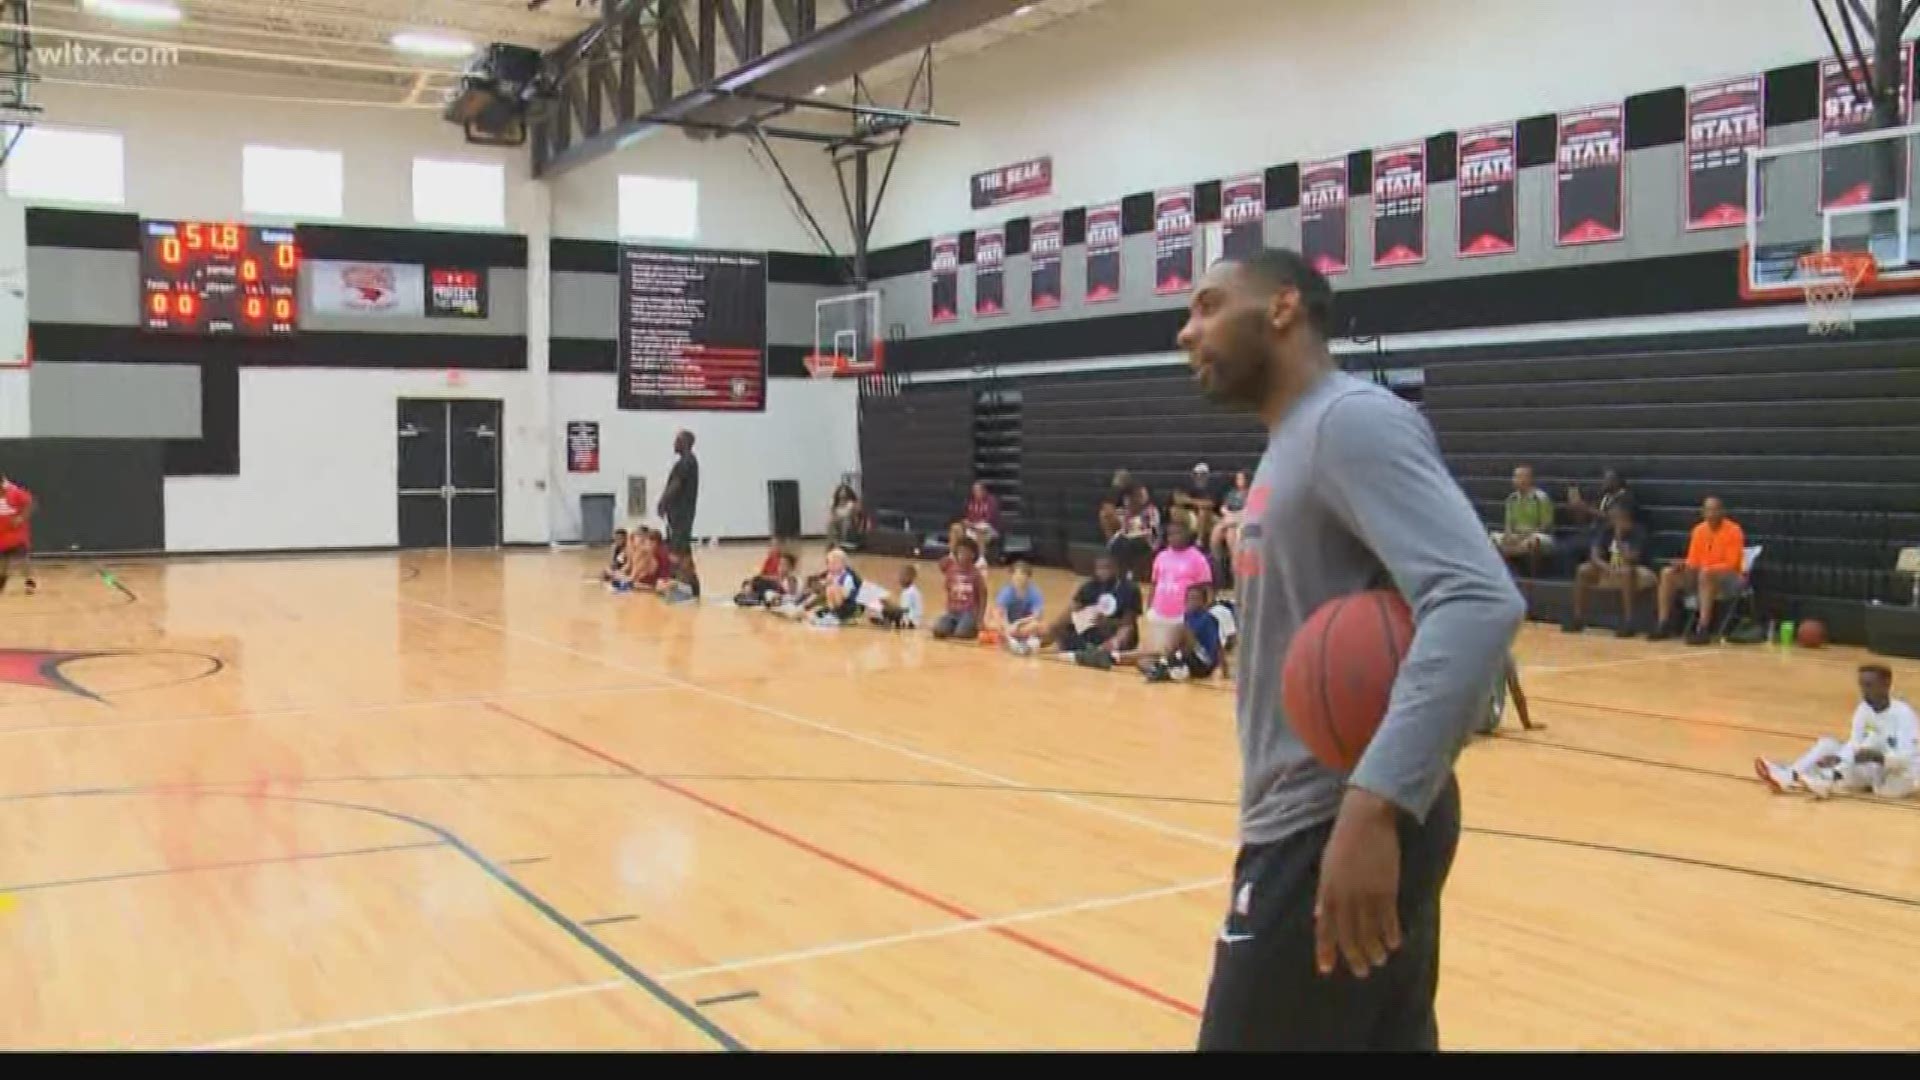 Former Gamecock Sindarius Thornwell was in Columbia Saturday hosting a youth basketball camp.